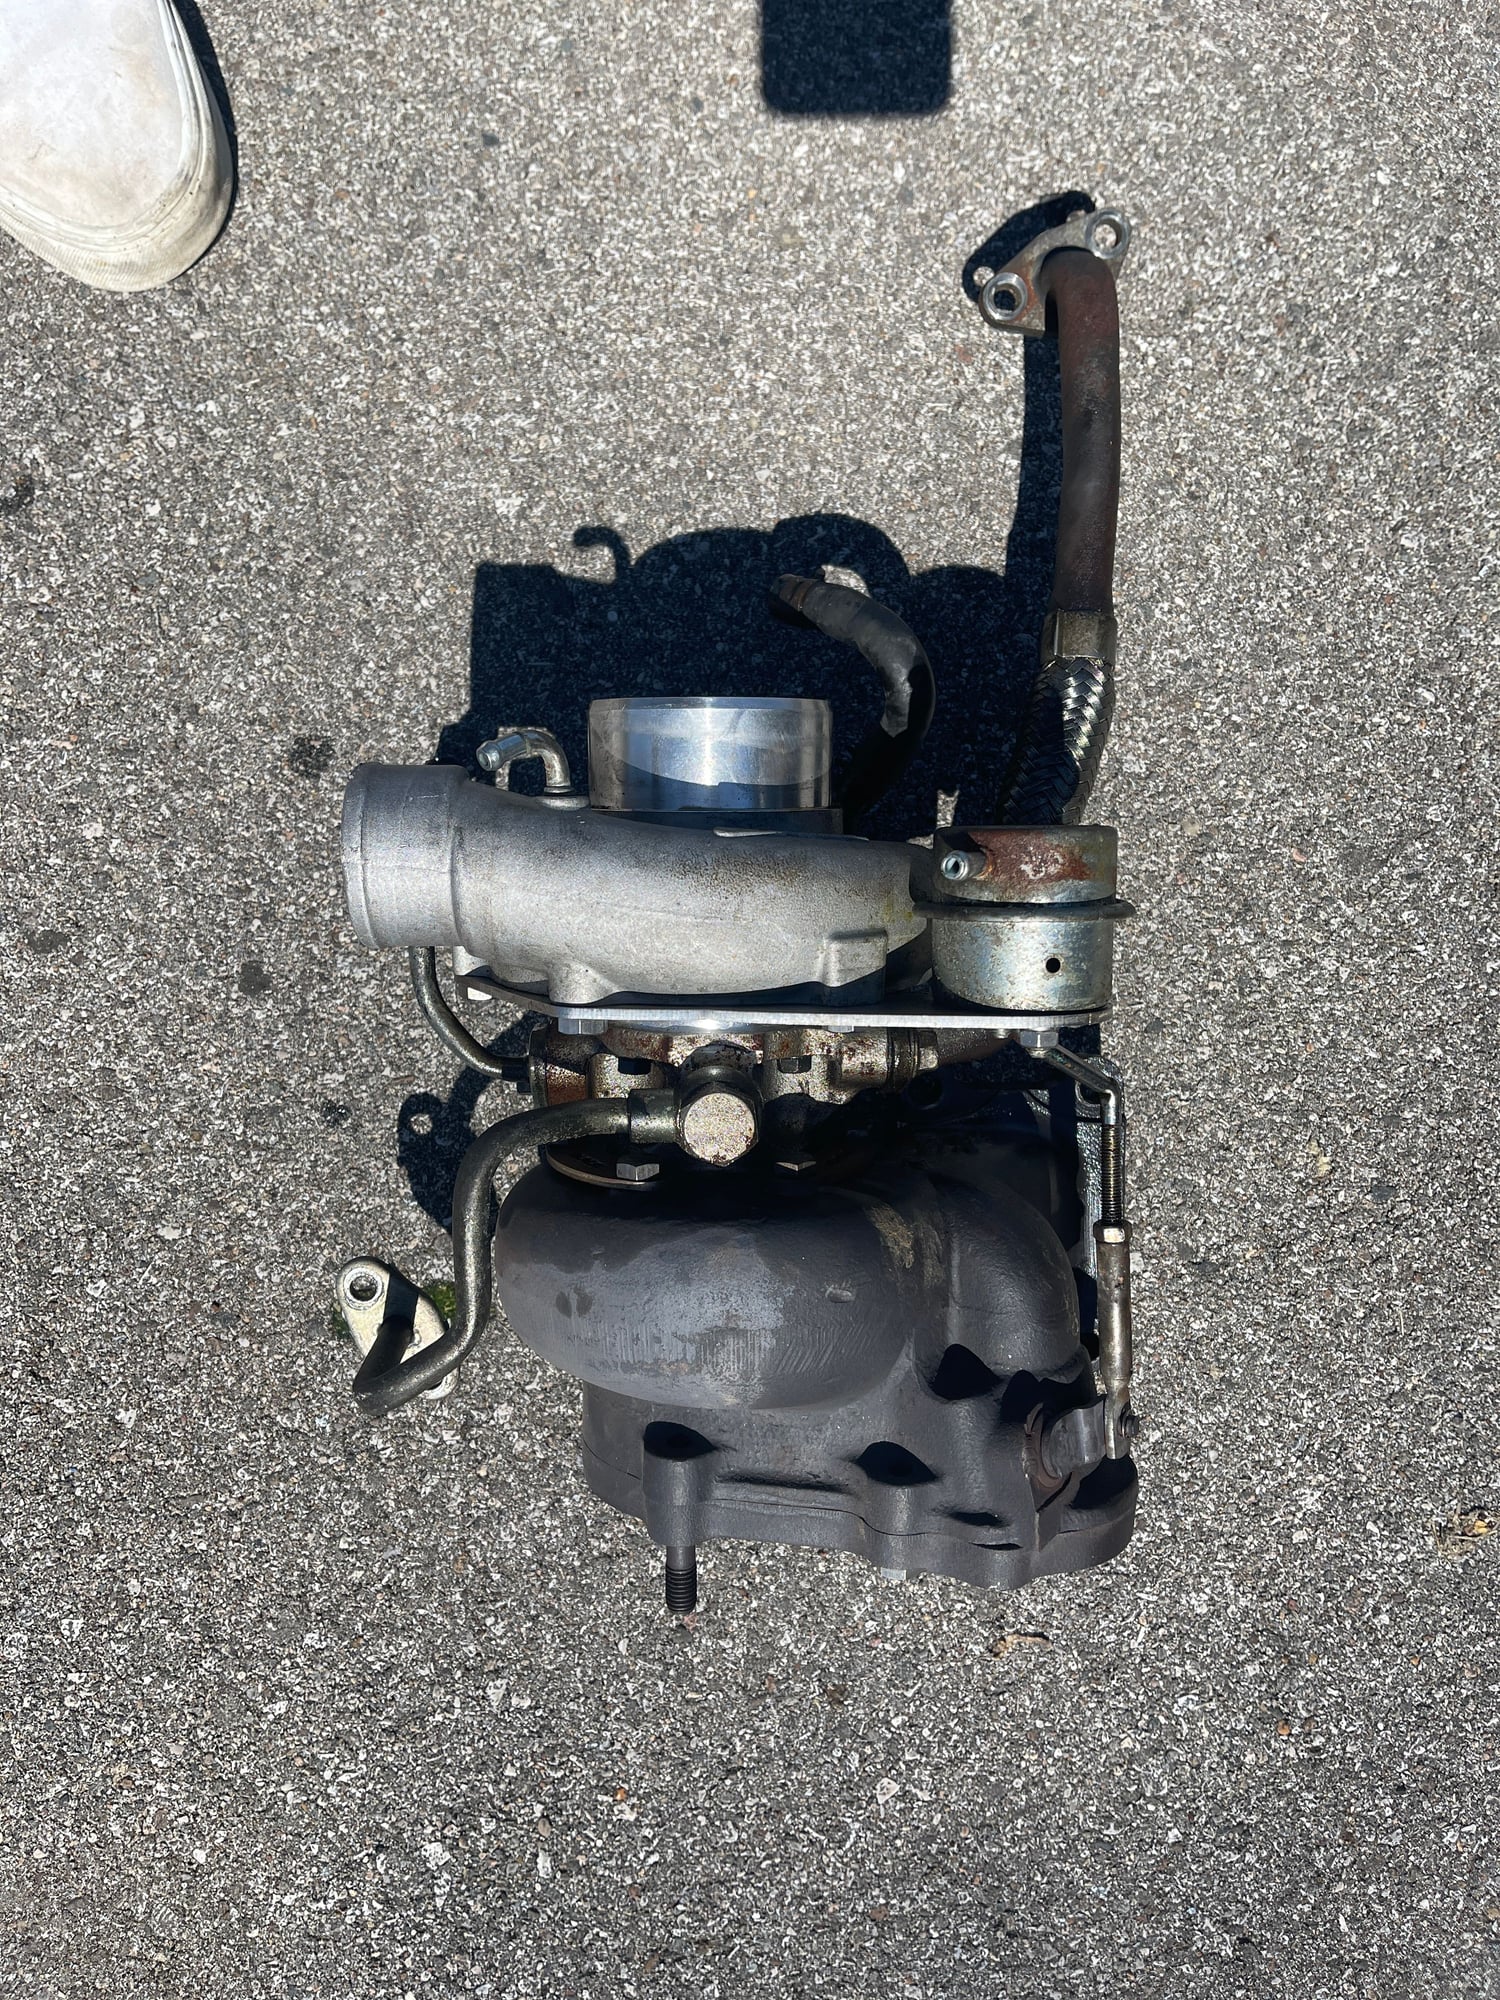 Engine - Power Adders - S5 FC3S BNR Turbocharger Stage 1 - Used - 1989 to 1991 Mazda RX-7 - Grand Rapids, MI 49546, United States